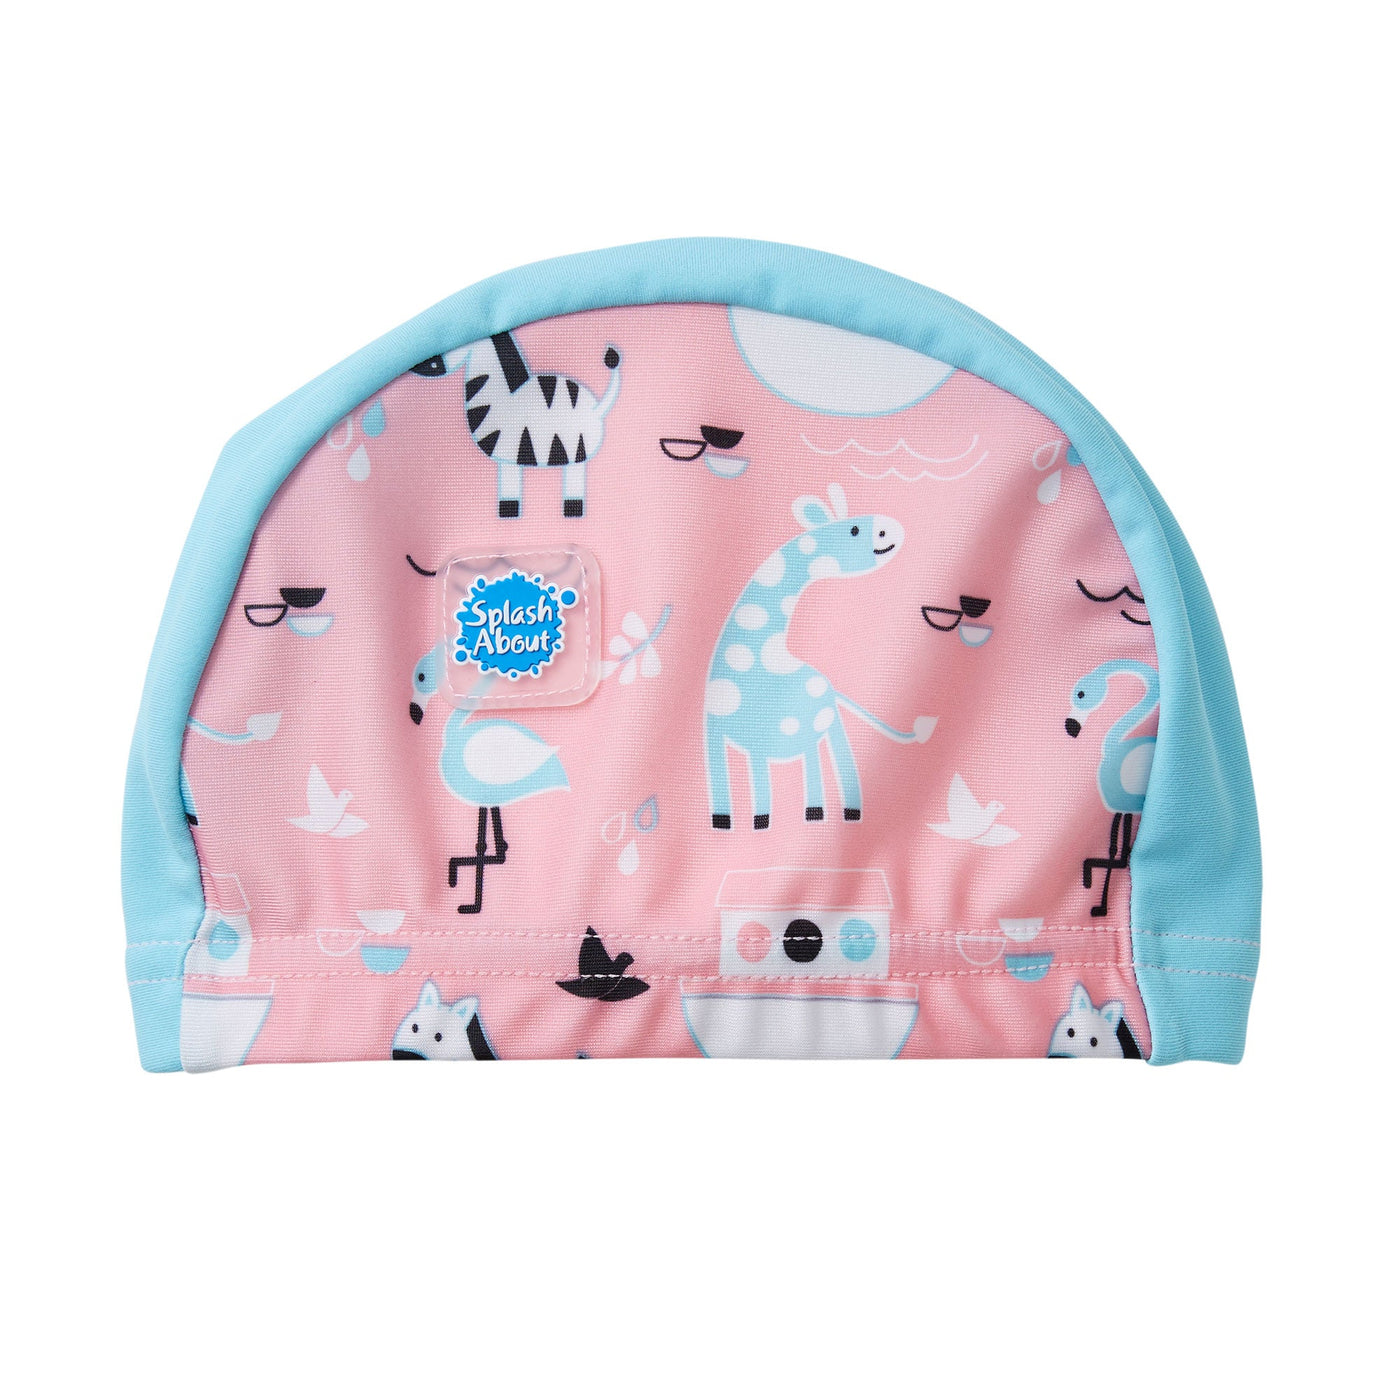 Cute baby swim hat in baby pink with light blue trims and Noah's Ark themed print, birds, giraffes, flamingos and more.